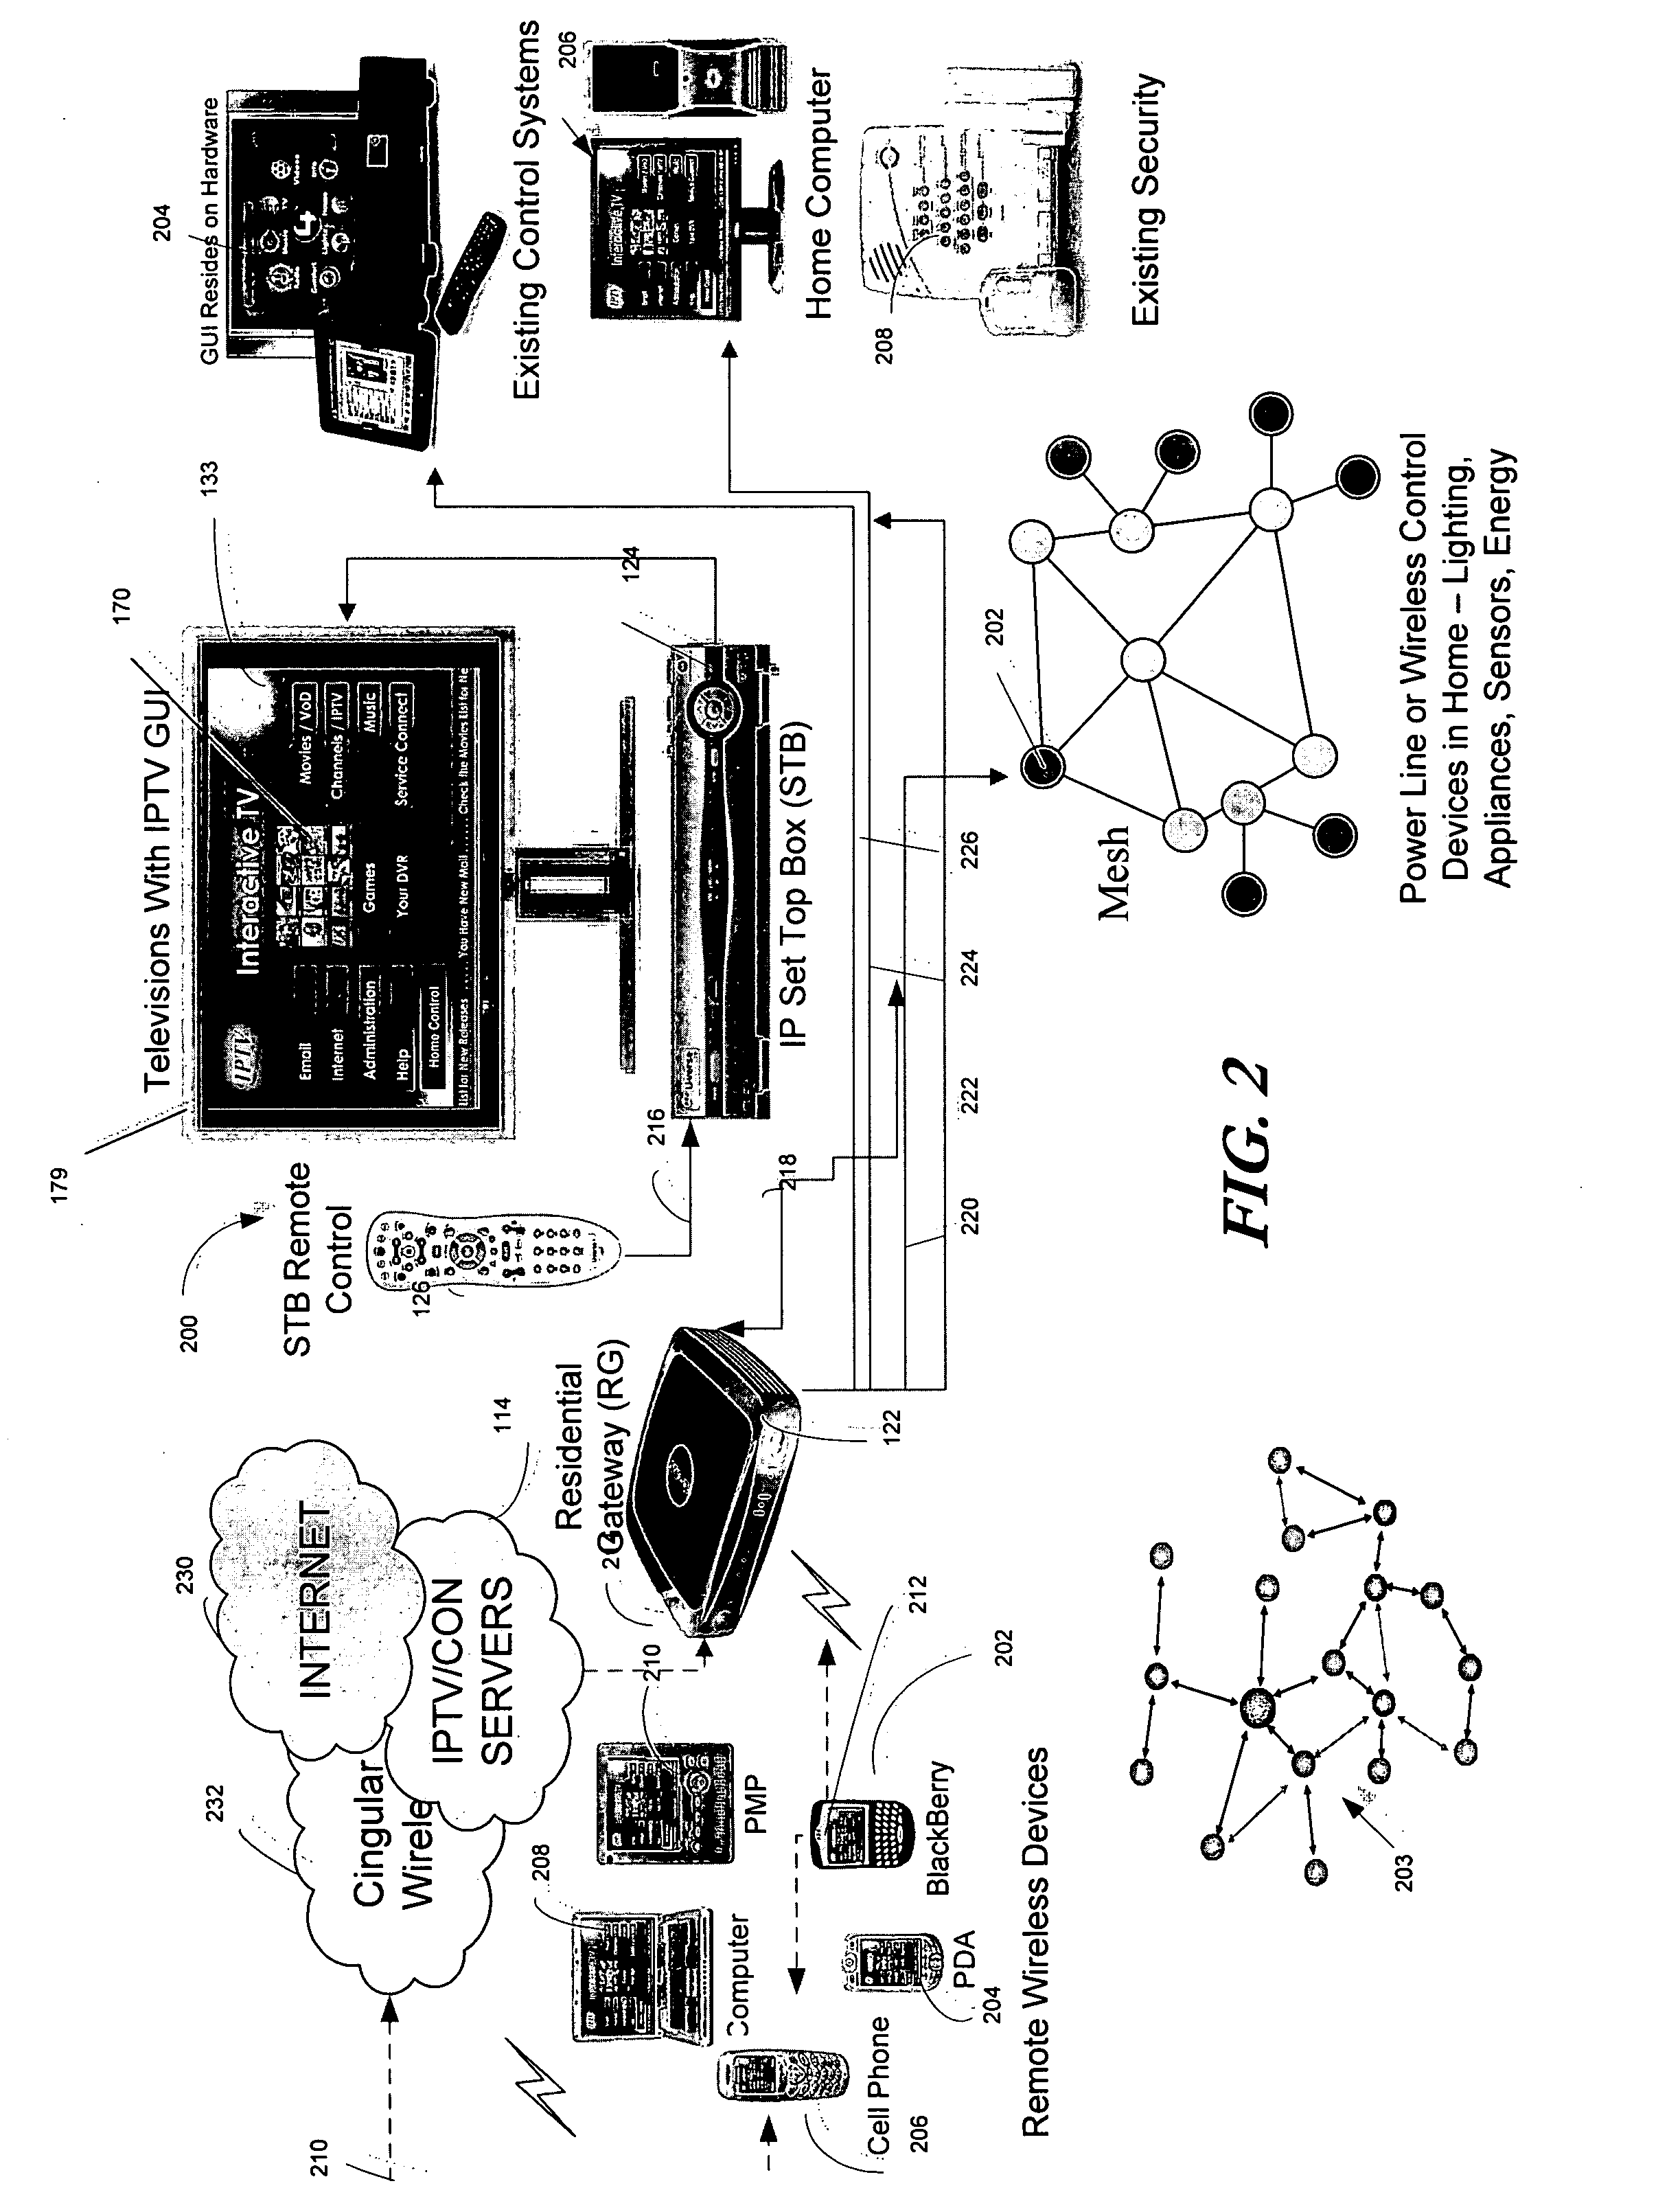 Home automation system and method